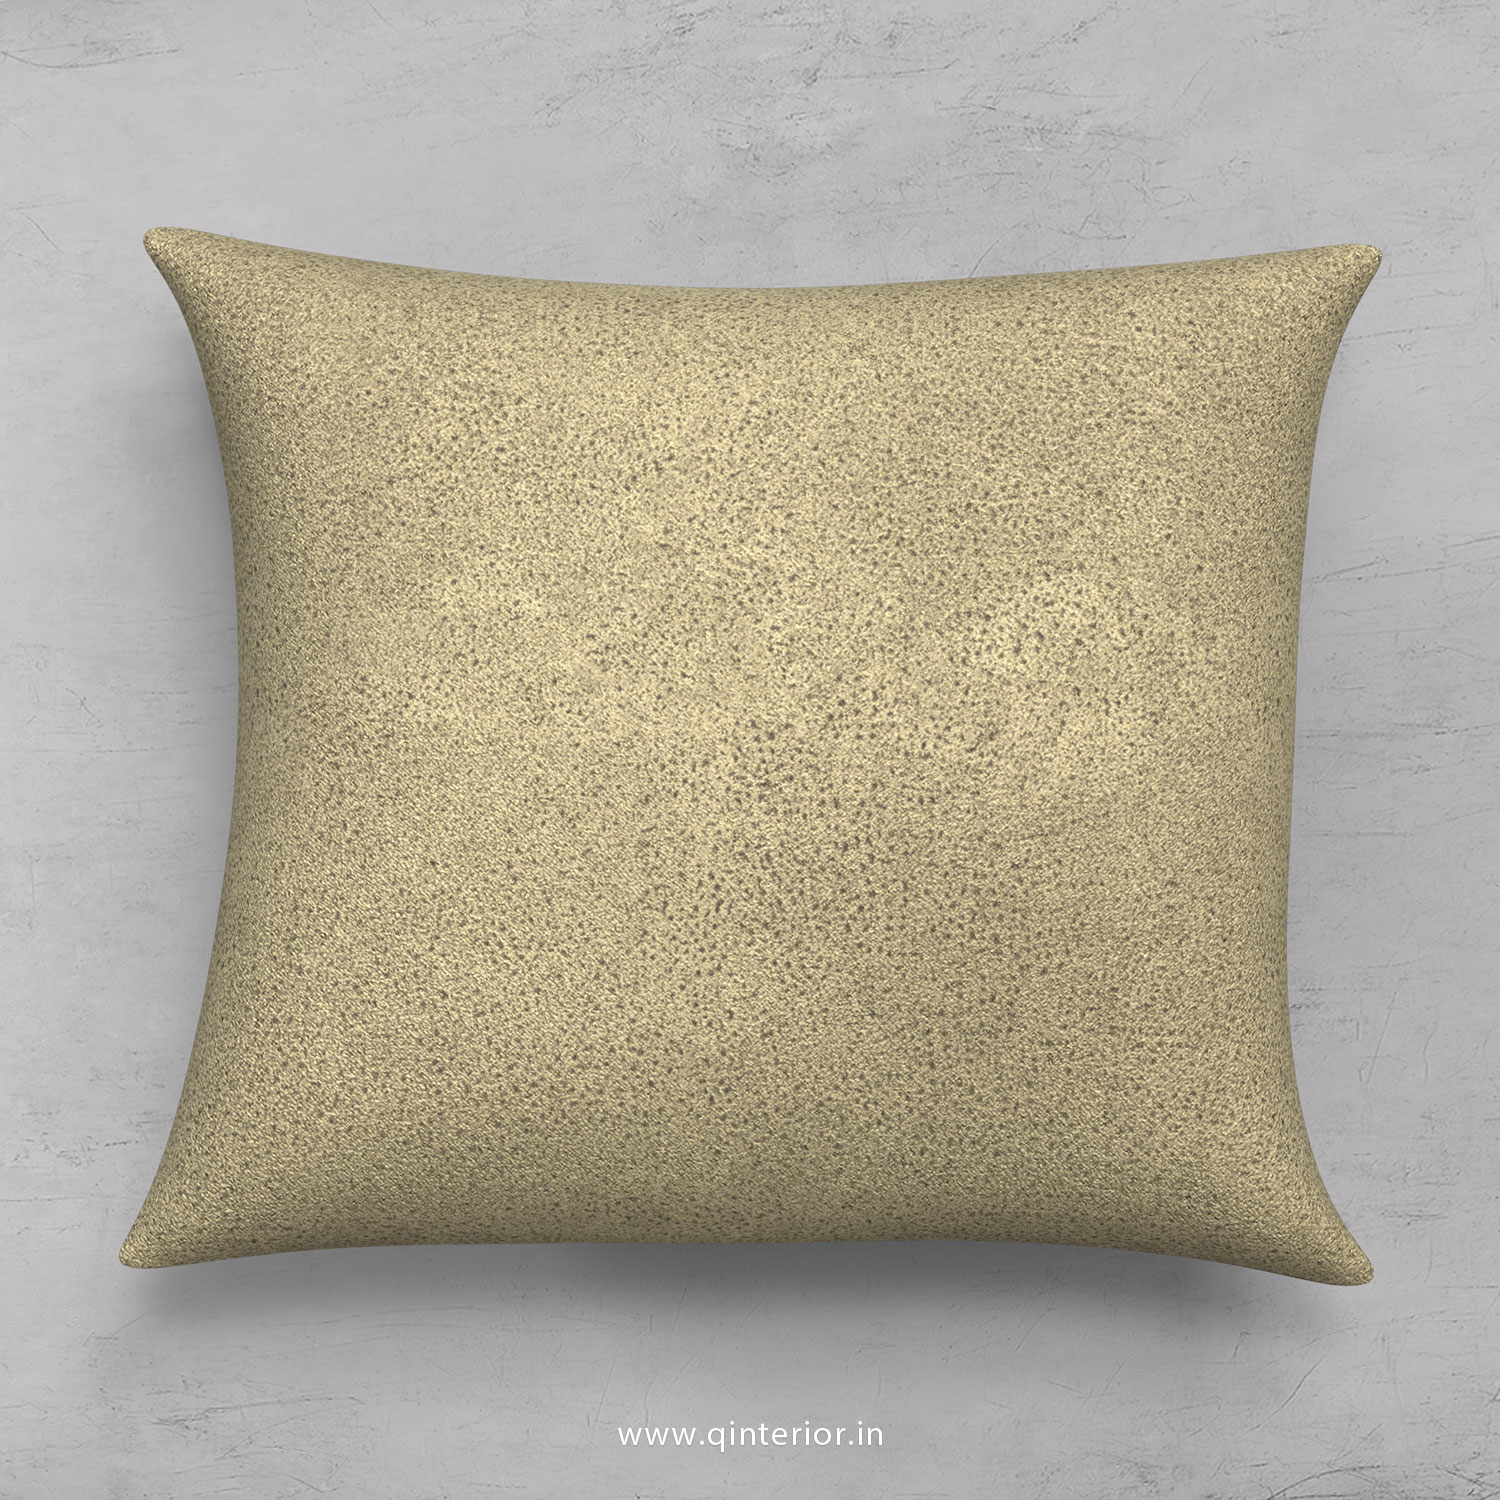 Cushion With Cushion Cover in Fab Leather - CUS001 FL10